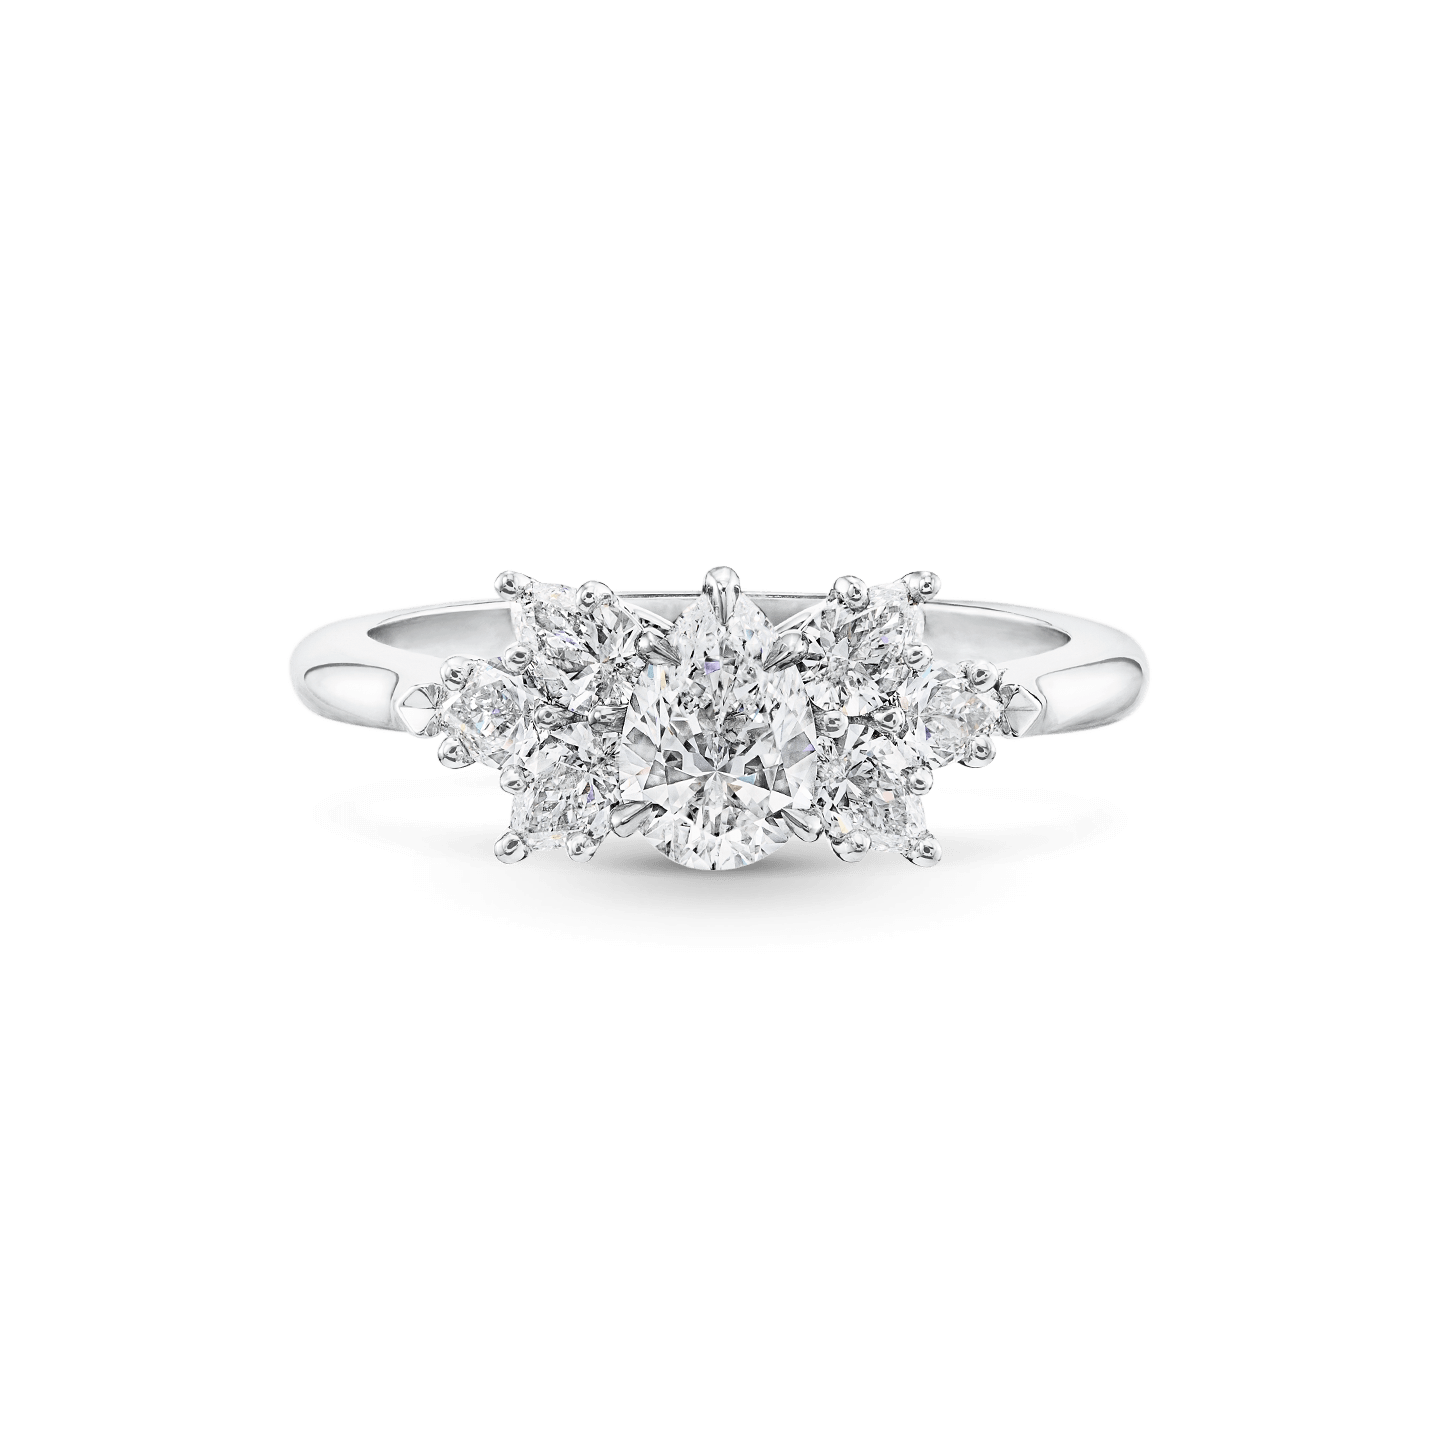 Front view of the Pear-Shaped Cluster Diamond Engagement Ring